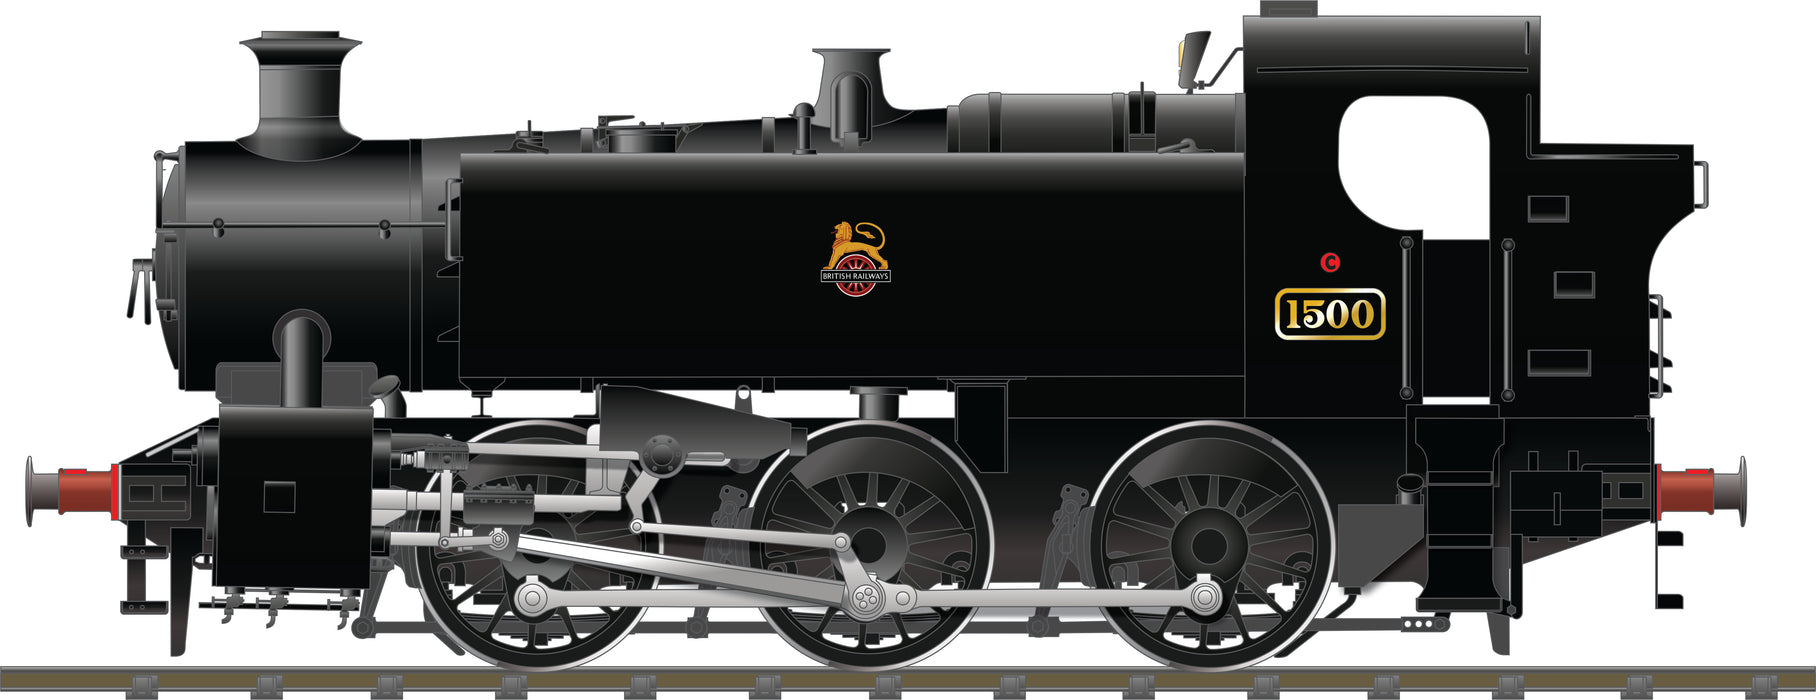 Rapido 904502 WR '15XX' 0-6-0PT Unlined Black (Early Emblem)  No.1500, SOUND FITTED, Locomotive, OO Gauge